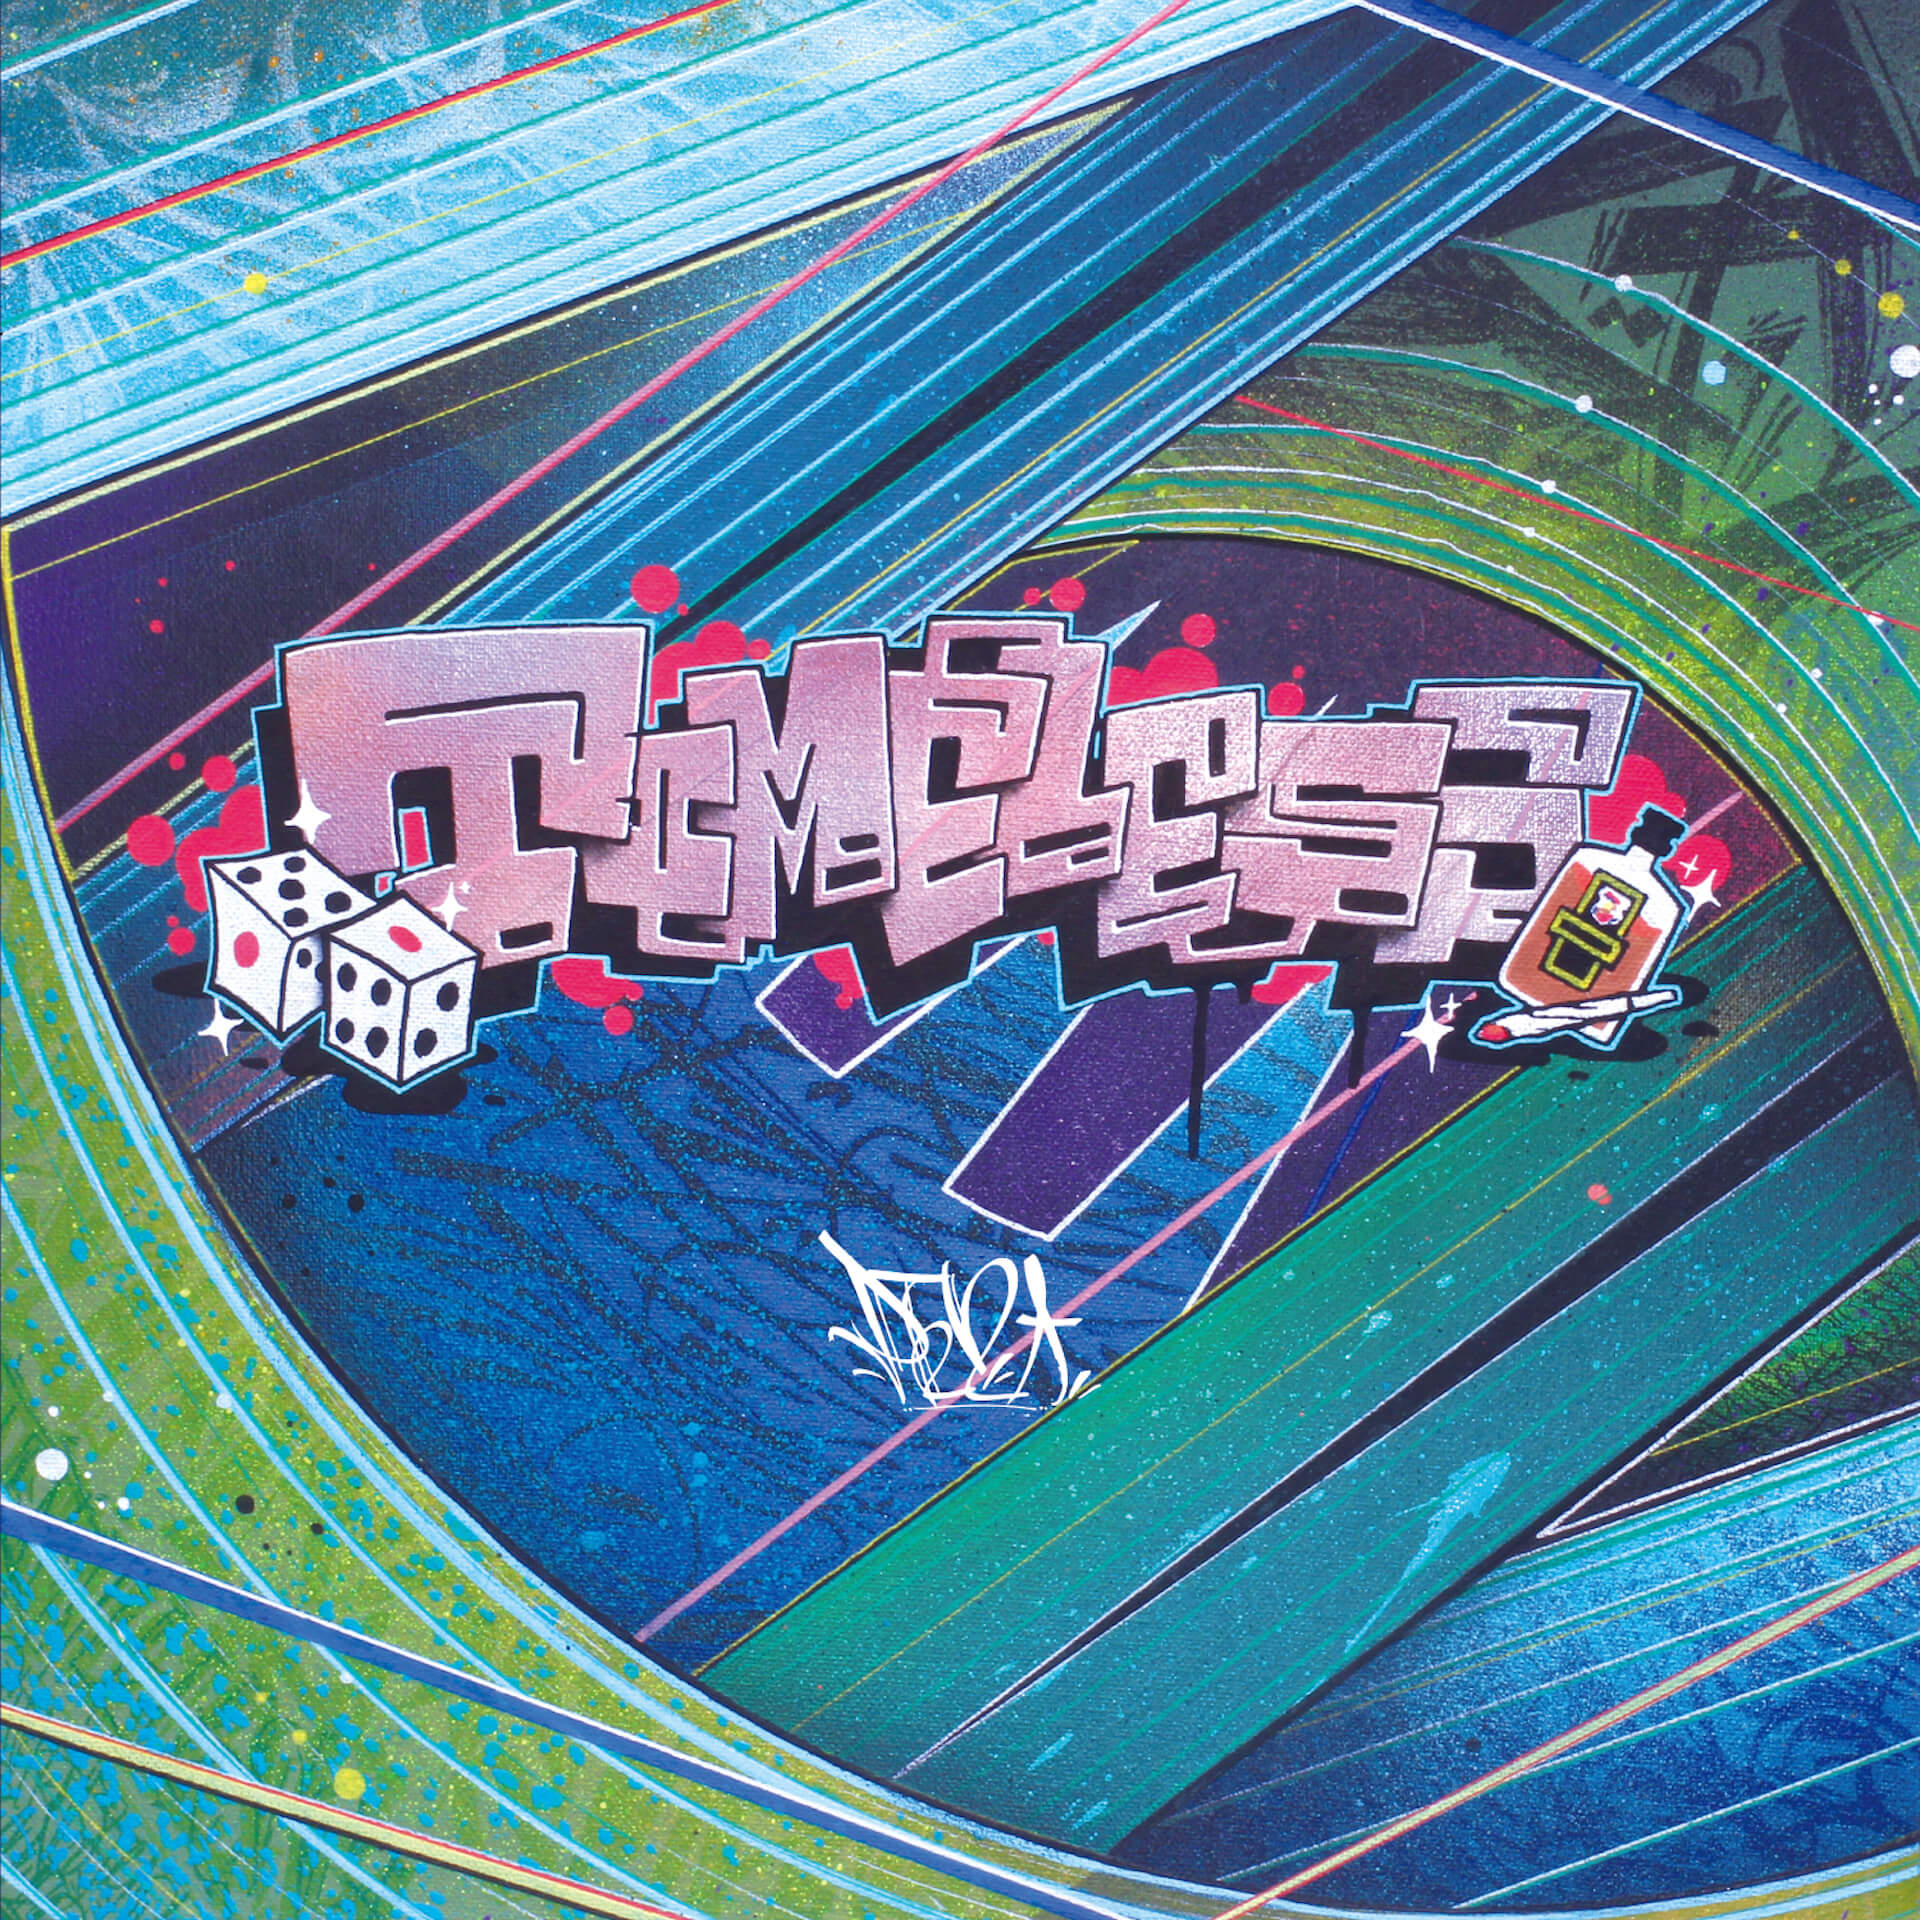 DIRTY JOINTのPE2、1stソロアルバム『TIMELSS』をリリース｜BLAHRMY、NASTY-K、 DON-8、​UME、CO∞、MAD JAG、總らが参加 music230313-dirty-joint-pe22